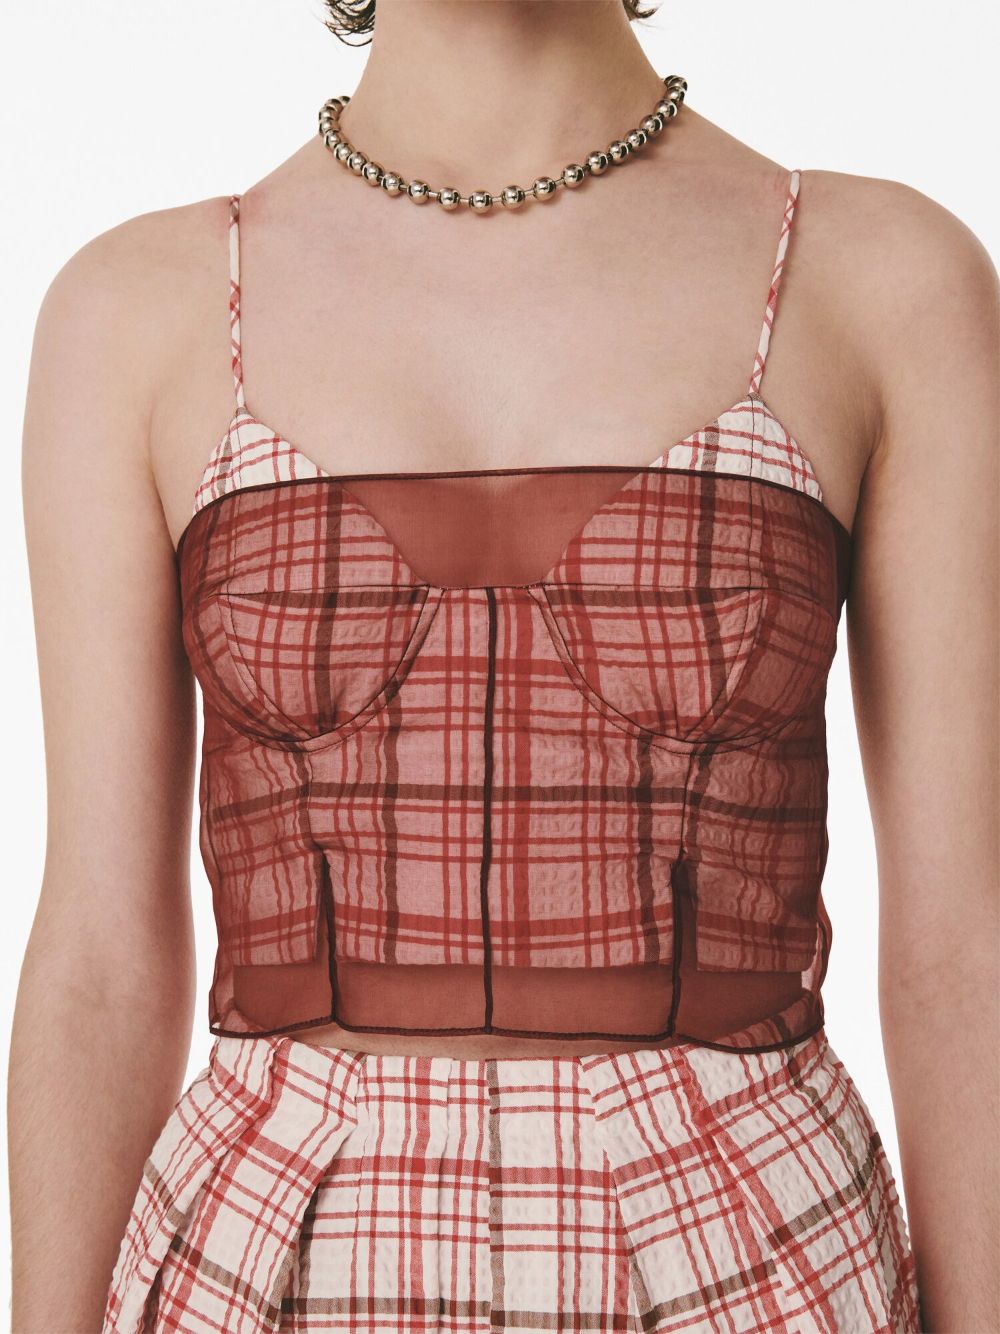 I Sheer Right Through You plaid bustier